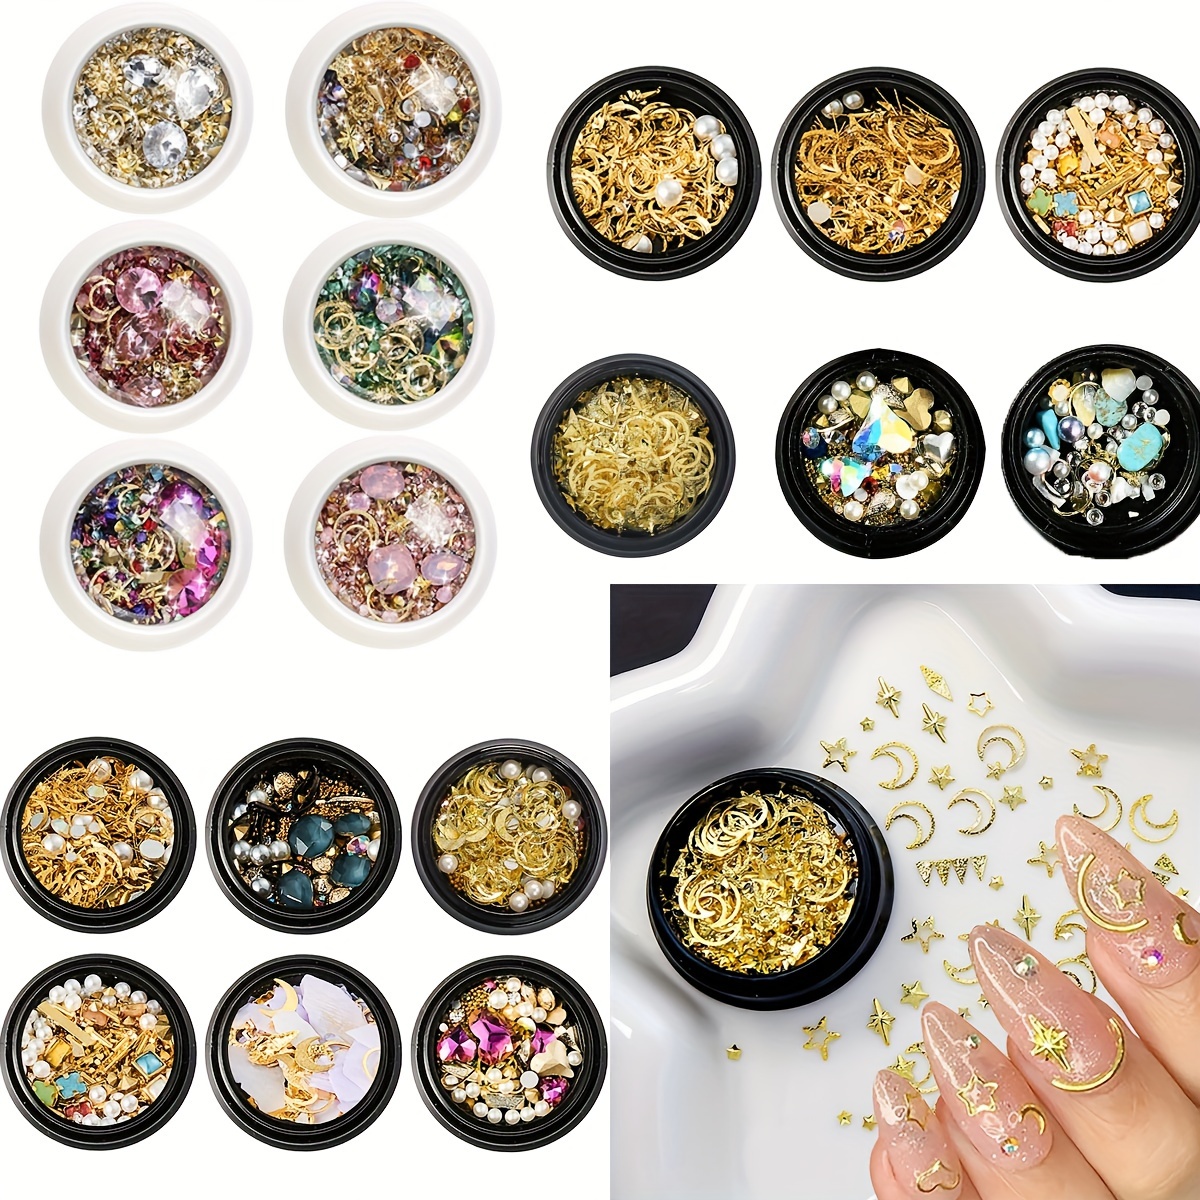 

20 Boxes Luxurious Nail Art Charms Glittering Star Moon - Premium 3d Metal Studs Withshimmering Crystals - Durable Alloy For Chic Manicures, Salon-styledecor, And Creative Nail Designs